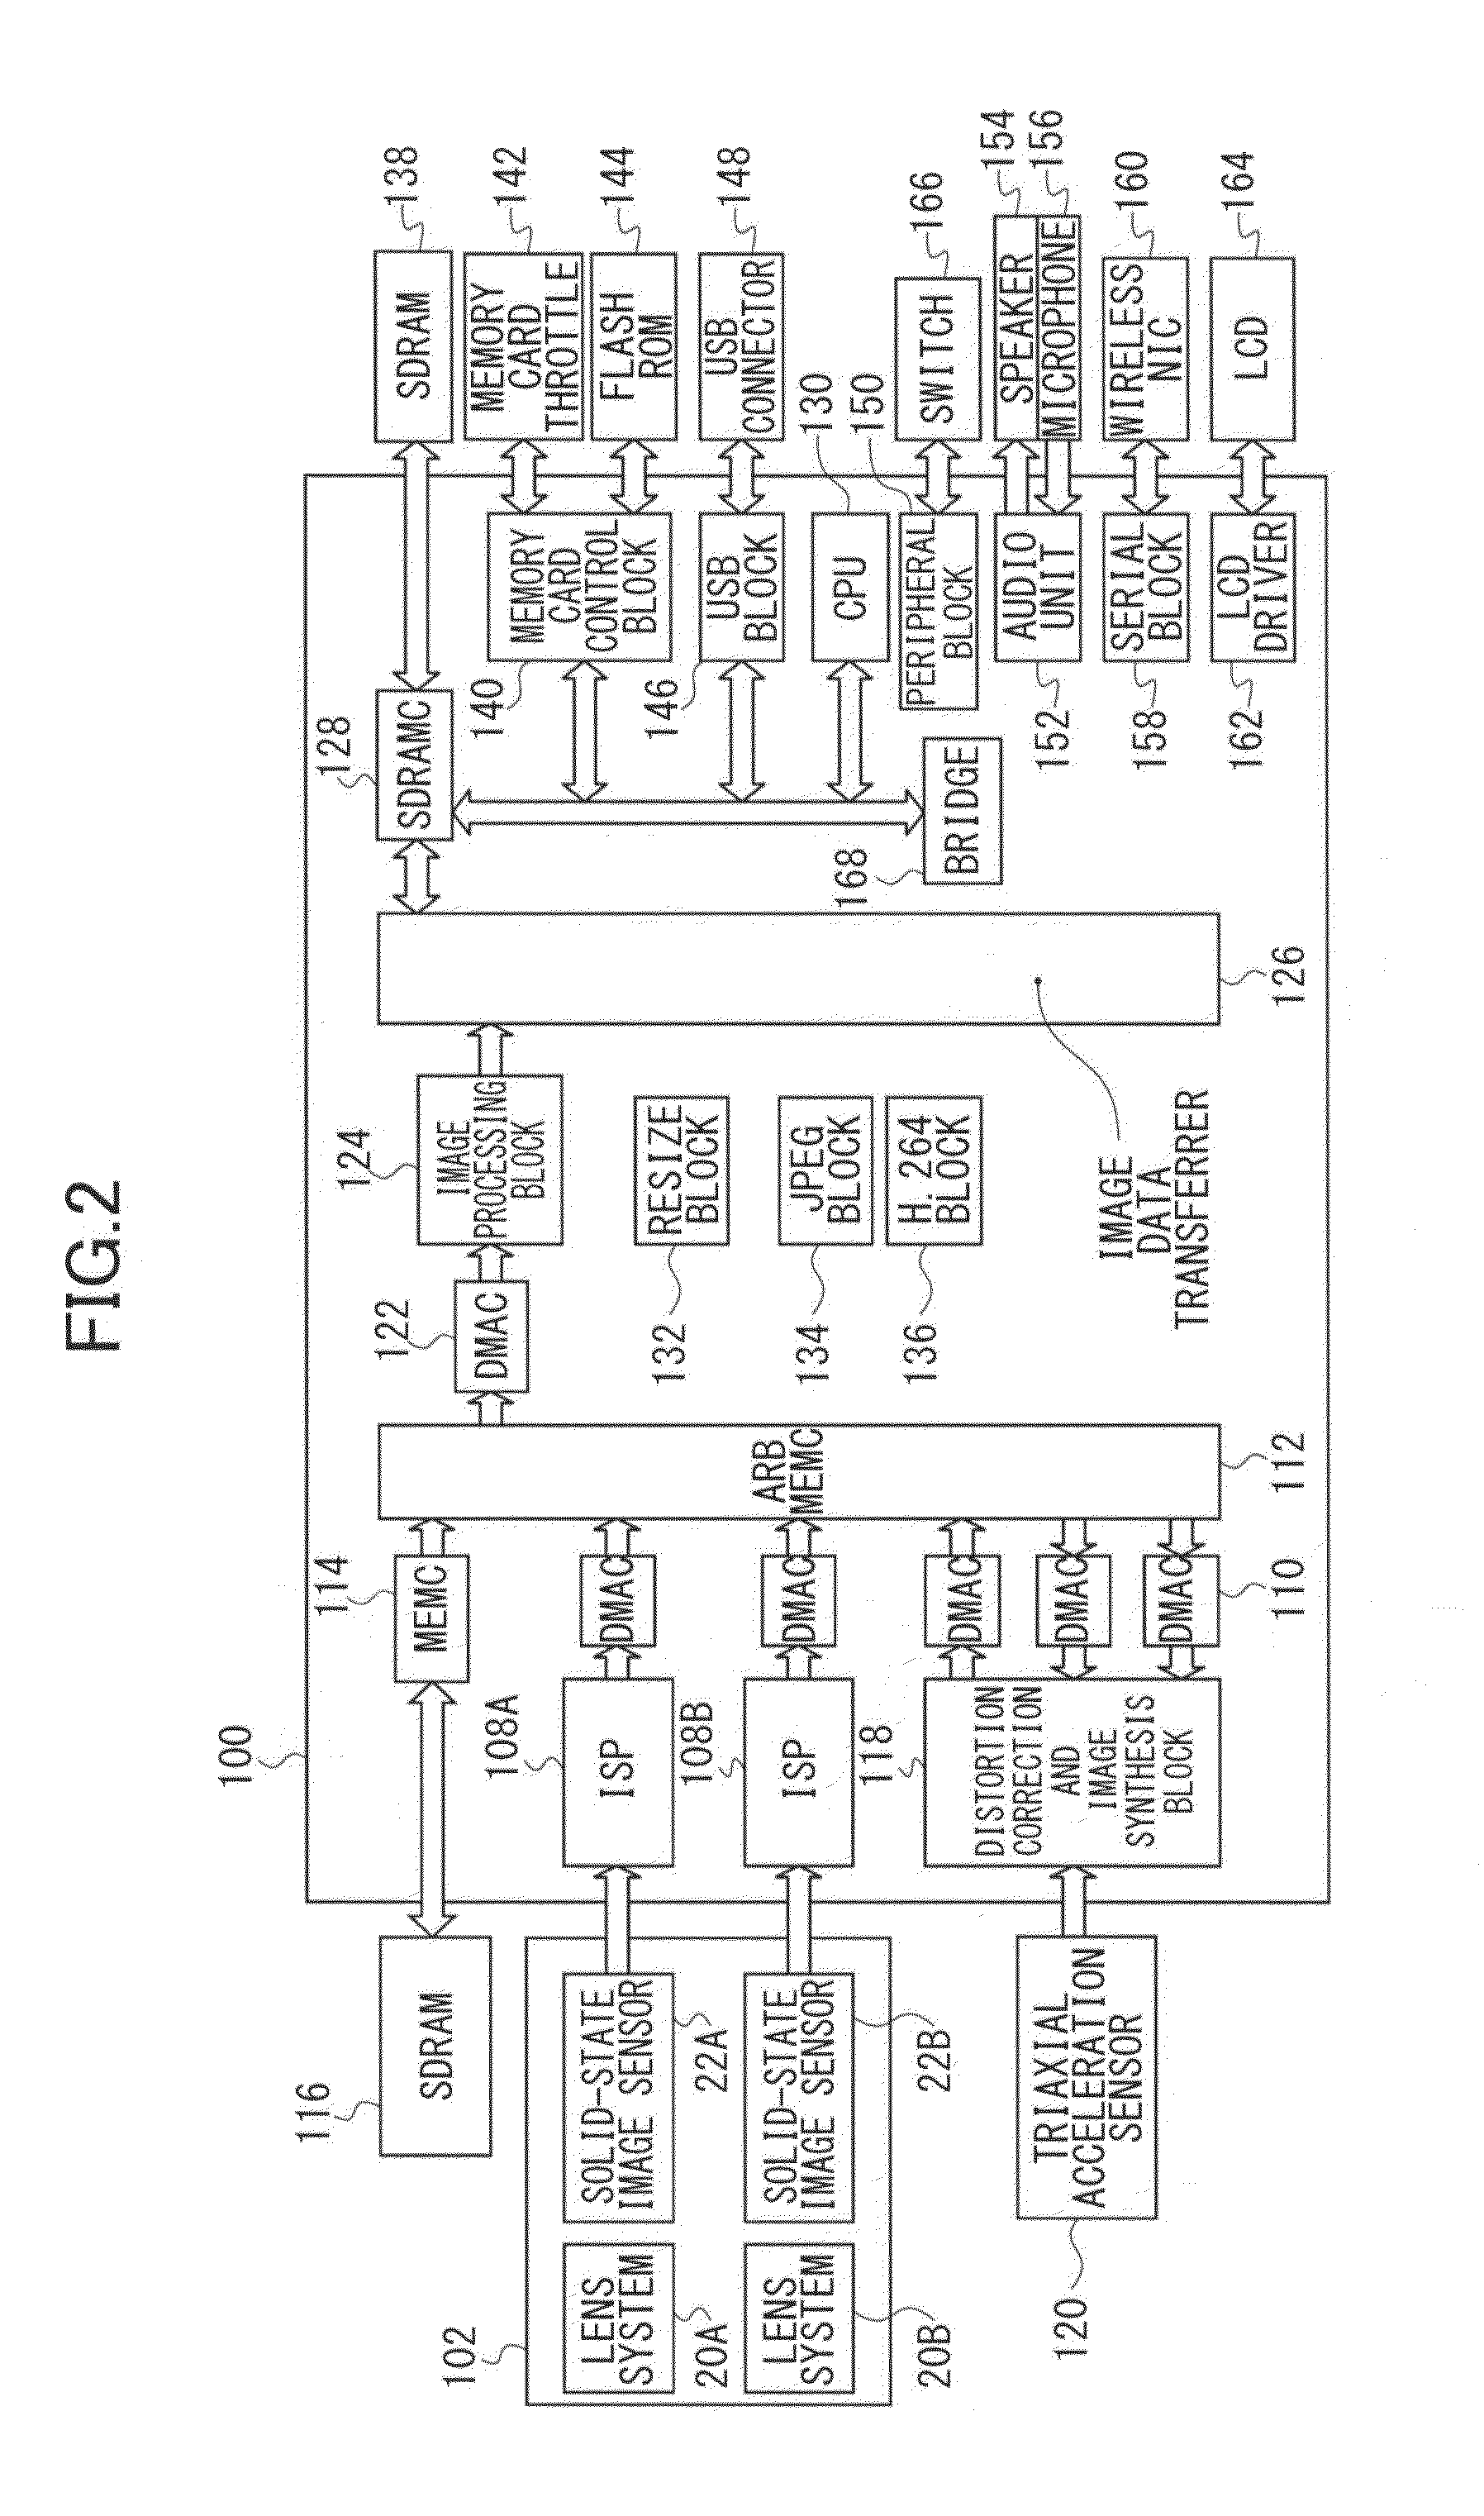 Image processor, image processing method and program, and imaging system